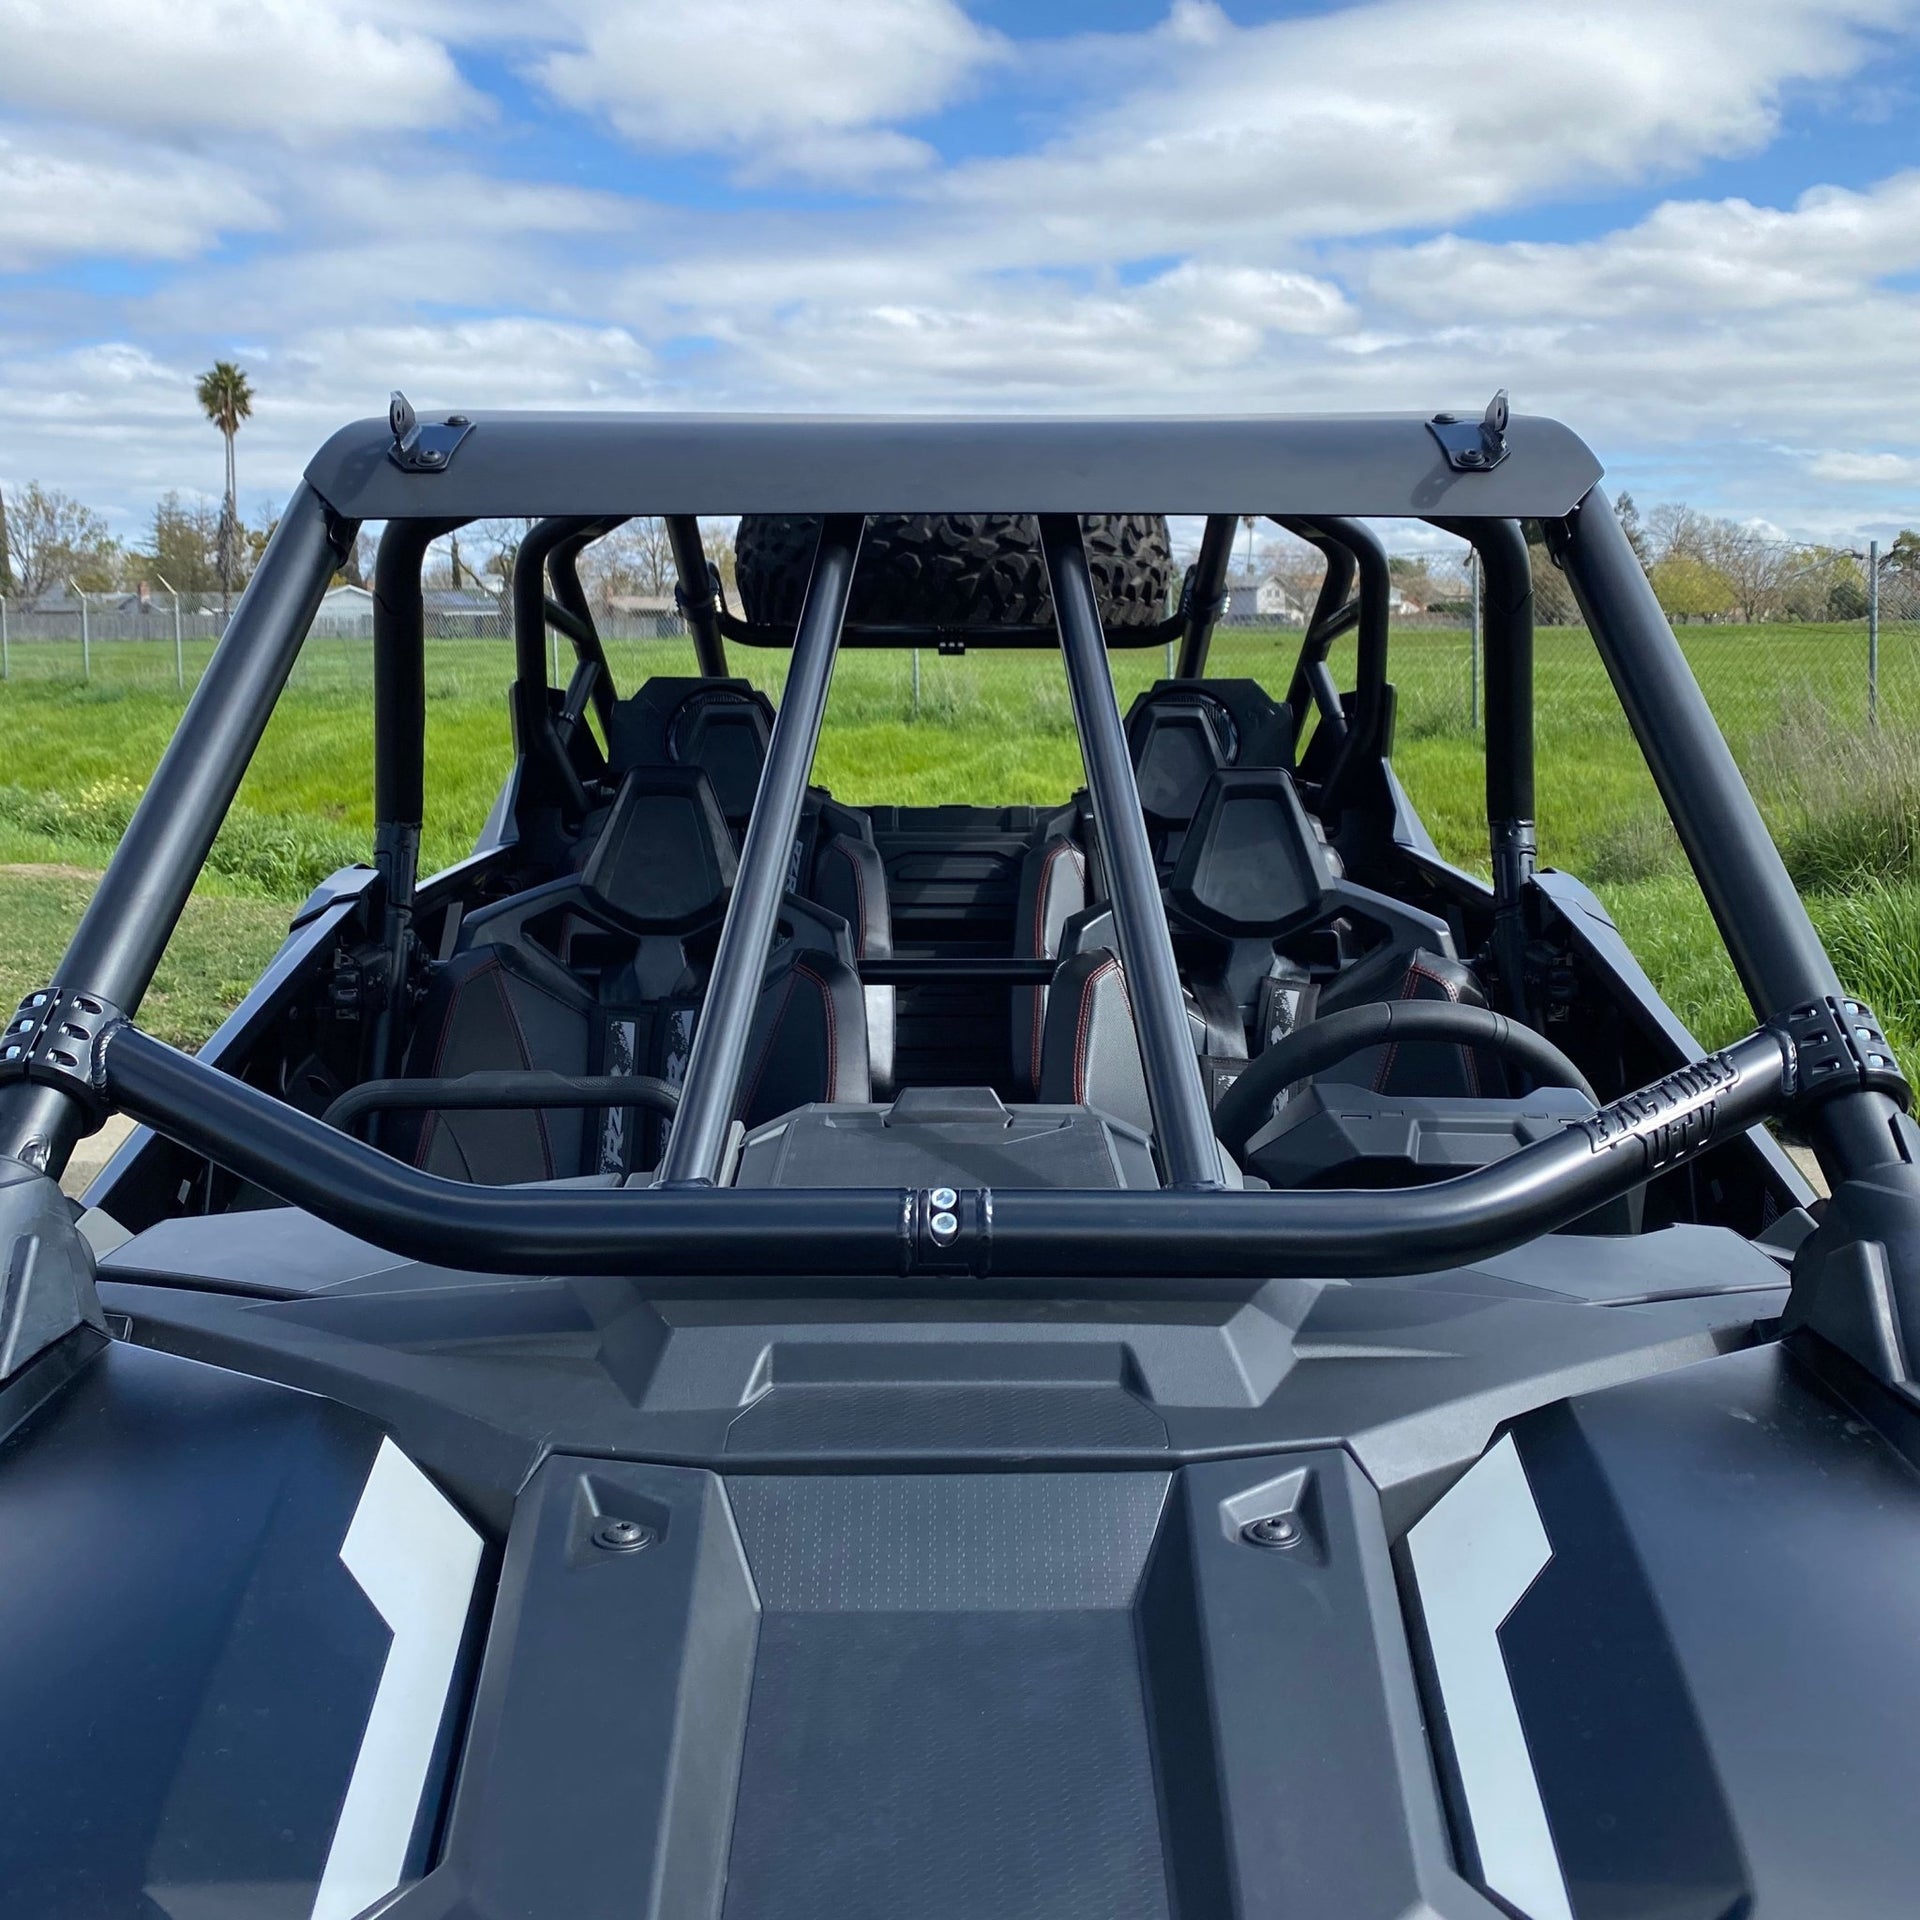 RZR Turbo R Front Intrusion Bar - OffRoad HQ